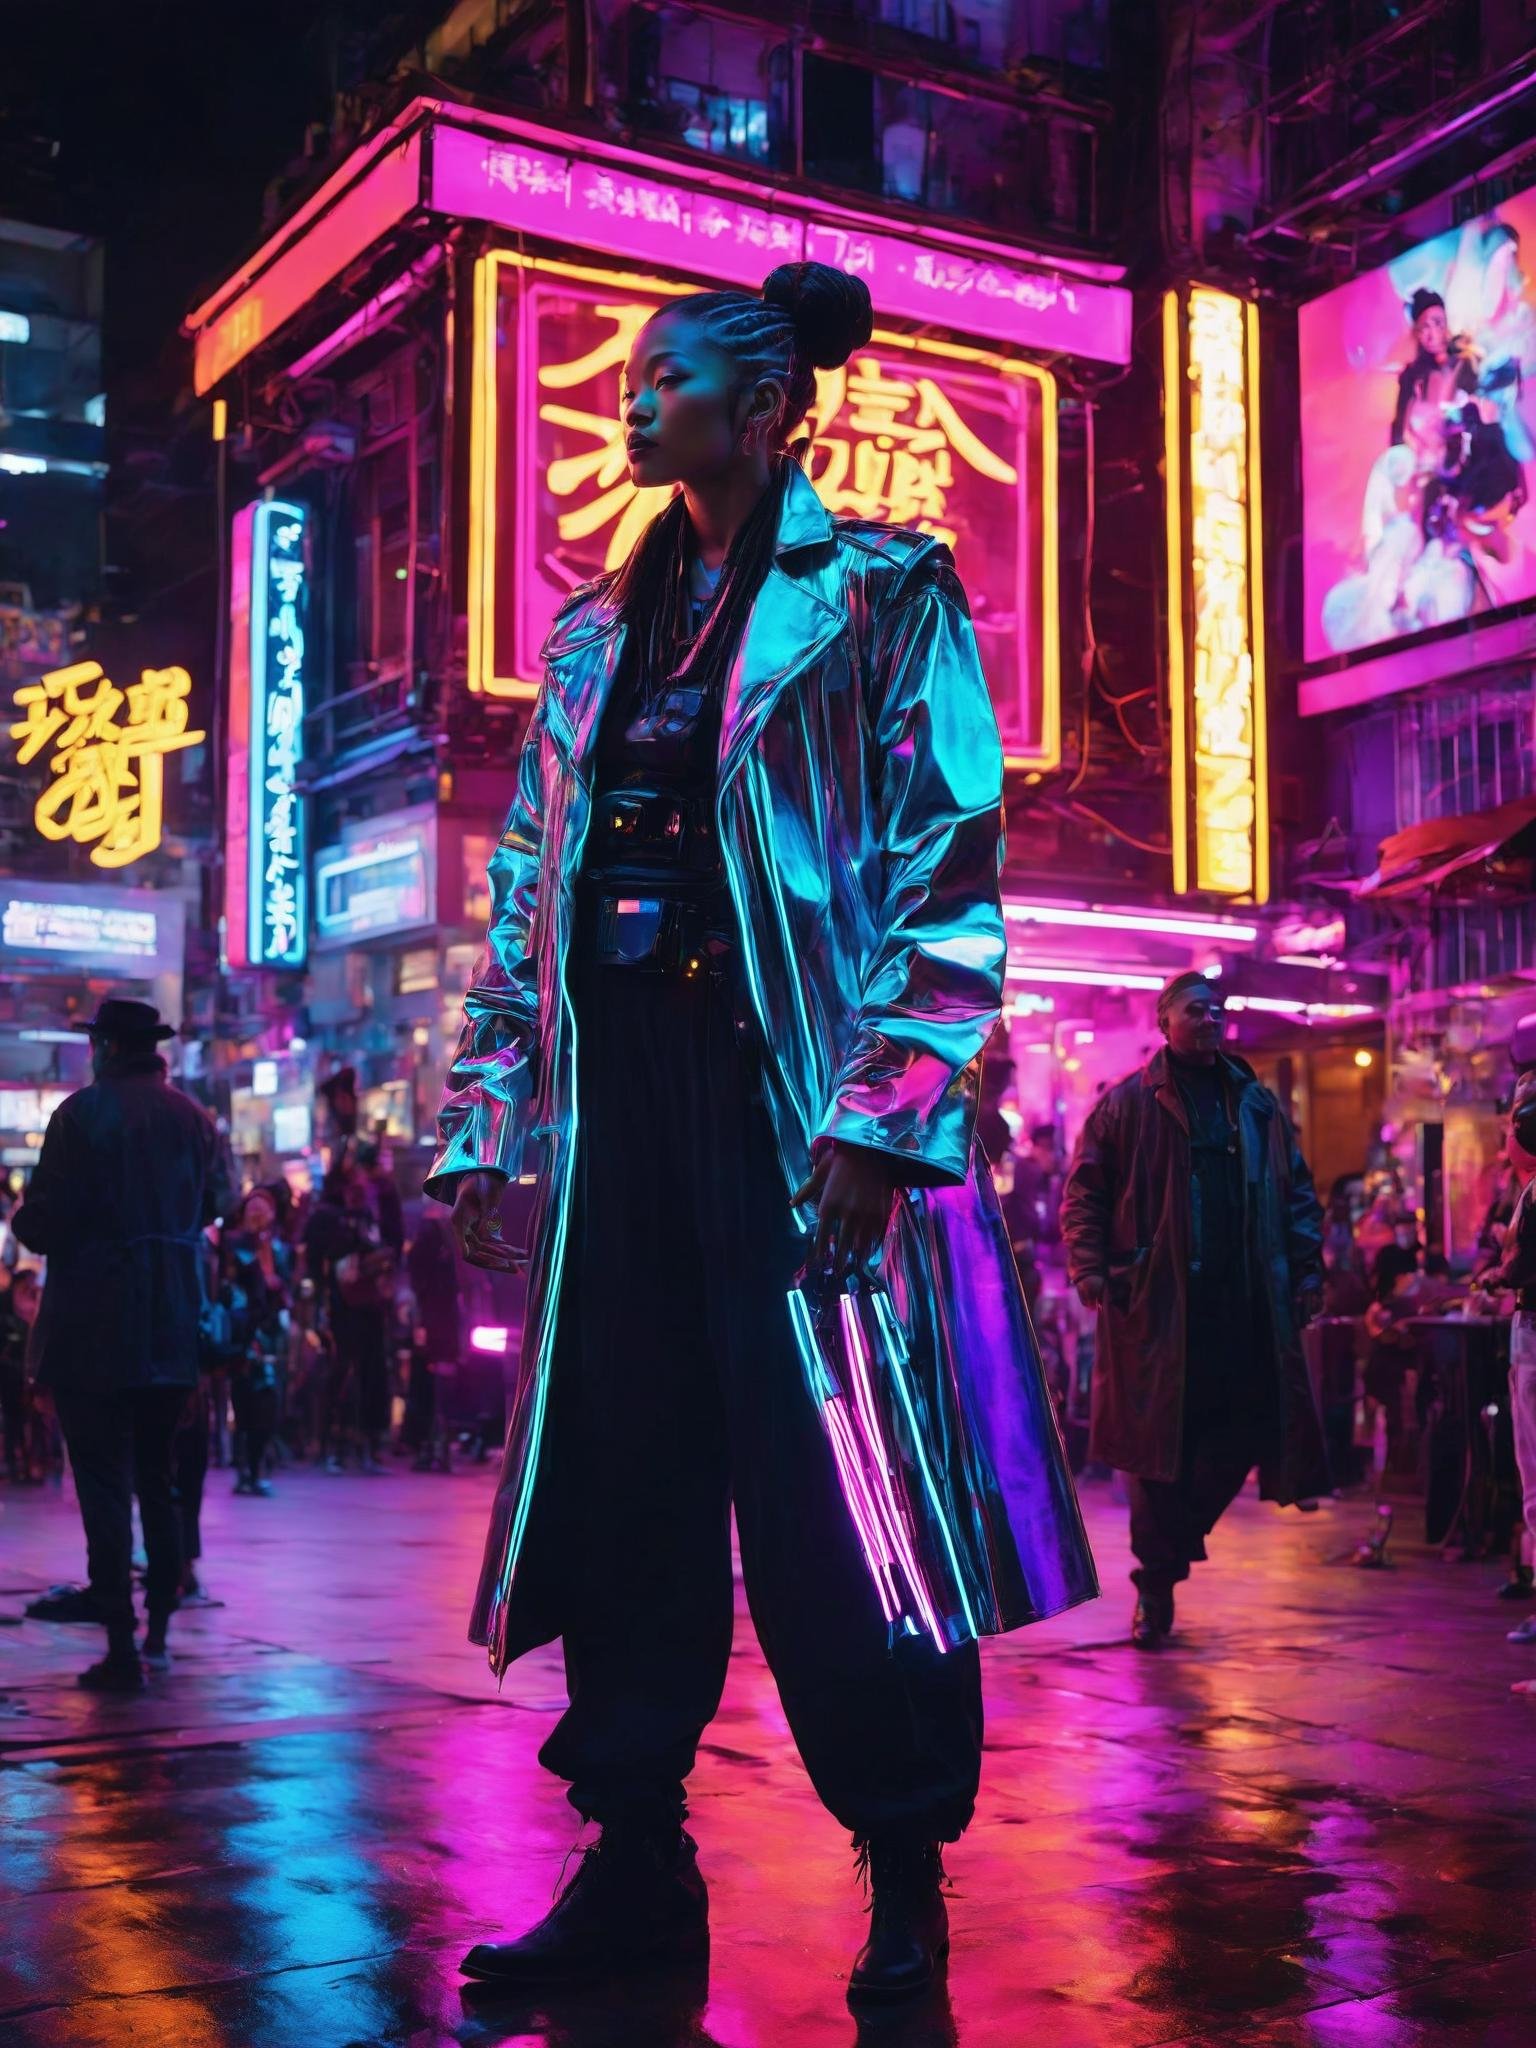 A cyberpunk street performer, blending the soulful tunes of jazz with Zen philosophy, mesmerizes audiences in a neon-lit urban square. Their attire, a fusion of vintage jazz style and modern cyberpunk fashion, resonates with a hint of Eastern influence. Amidst swirling neon lights, their performance transcends genres, captivating passersby with a unique blend of American musical heritage and hints of tranquil Zen ambiance., <lora:ByteBlade:1>